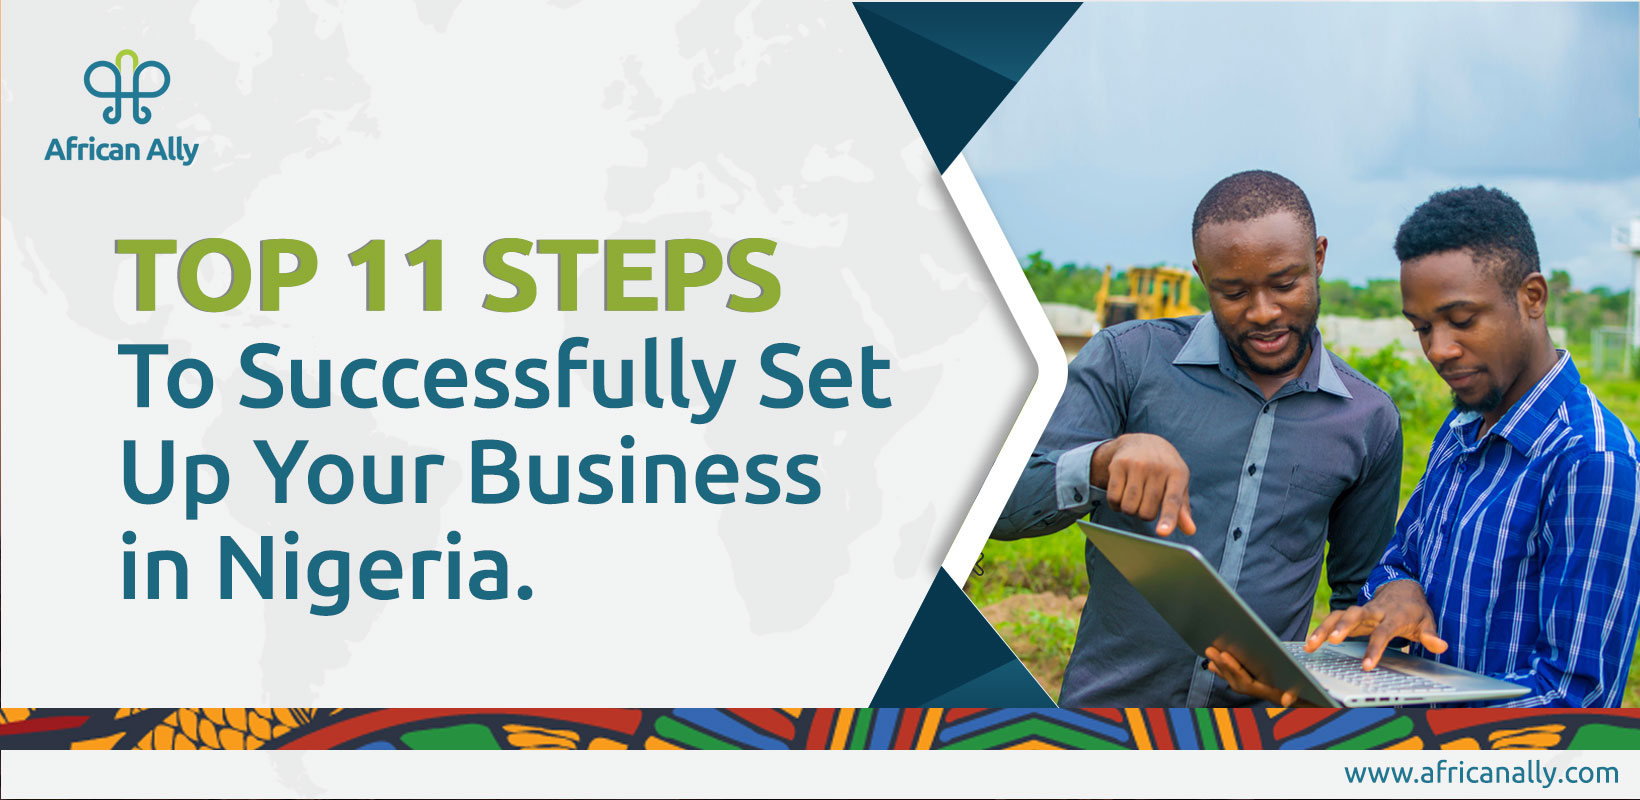 Top 11 Steps to Successfully Set Up a Business in Nigeria - Global